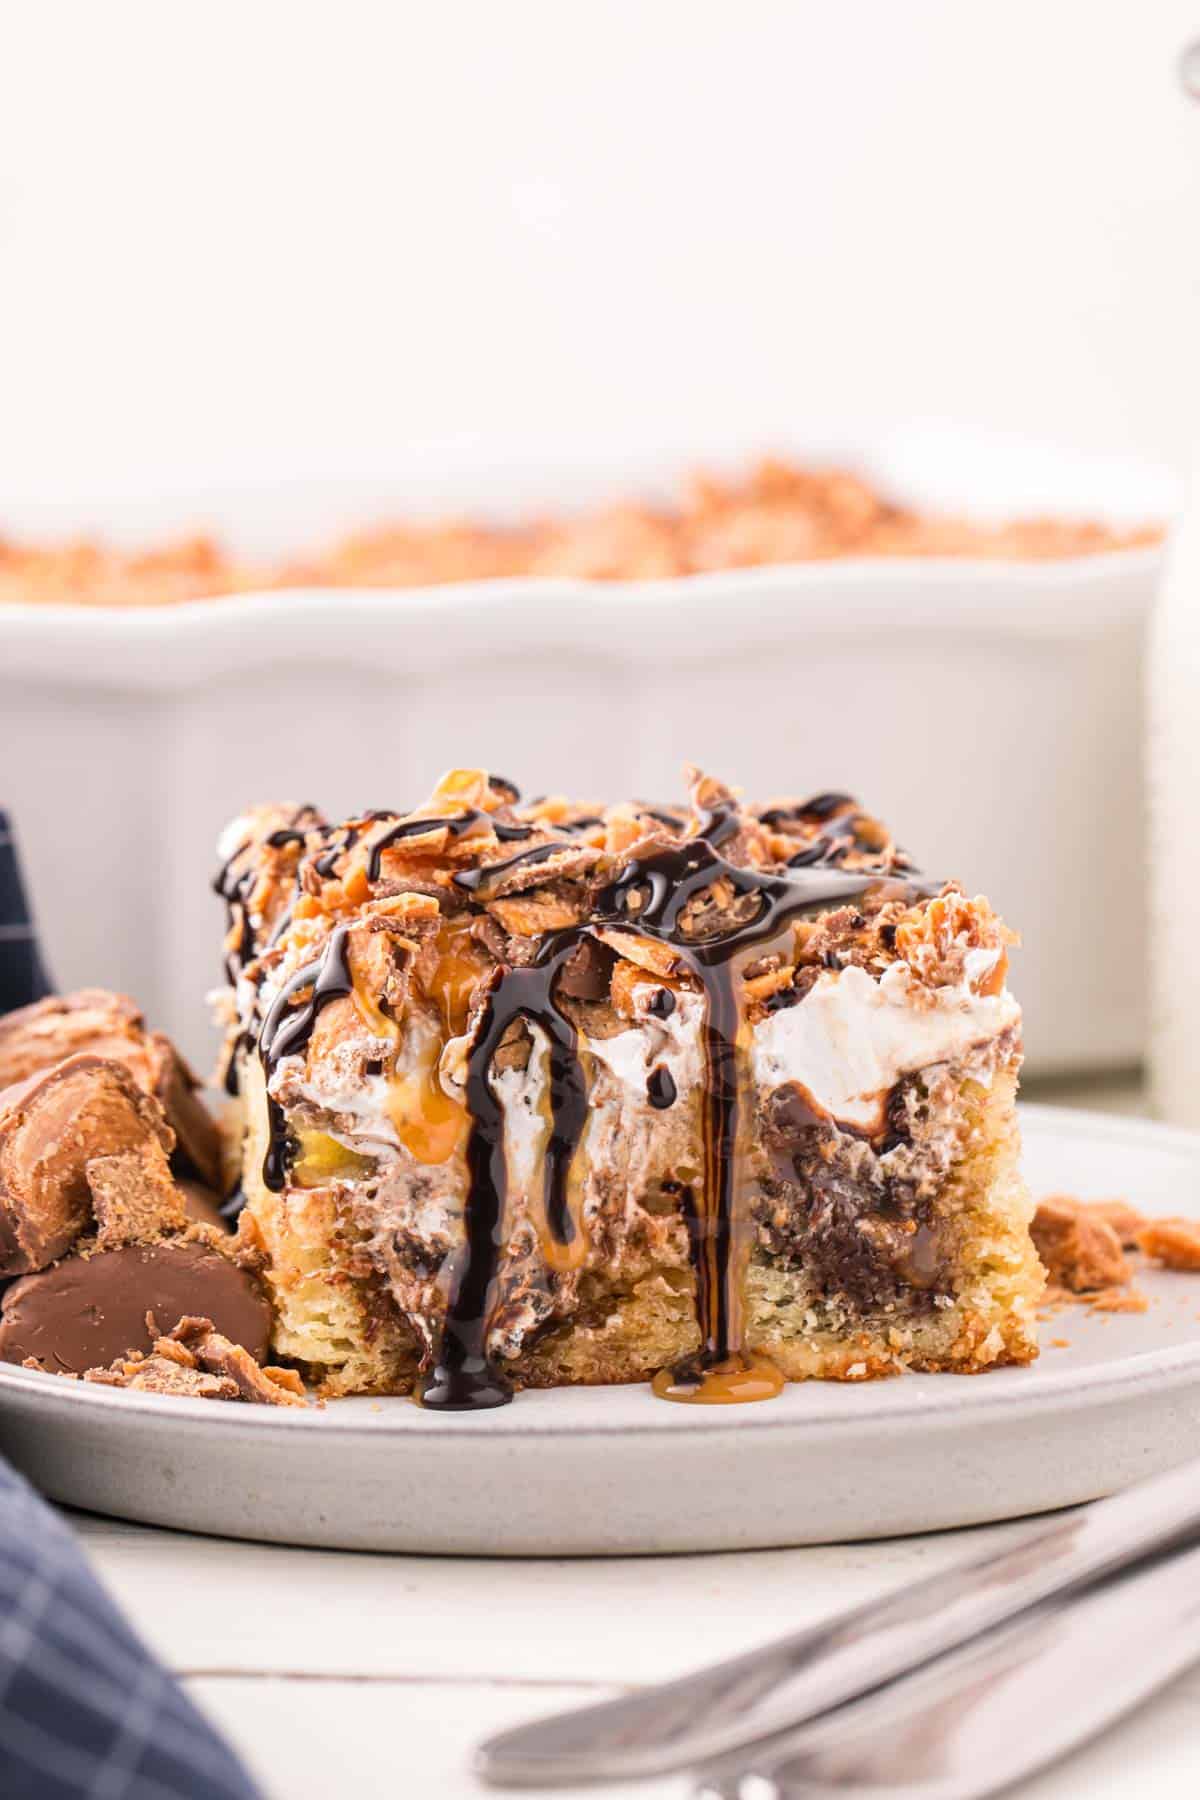 Butterfinger Poke Cake is a decadent dessert starting with a golden cake filled with chocolate and caramel sauce and topped with whipped topping and chopped Butterfinger chocolate bars.